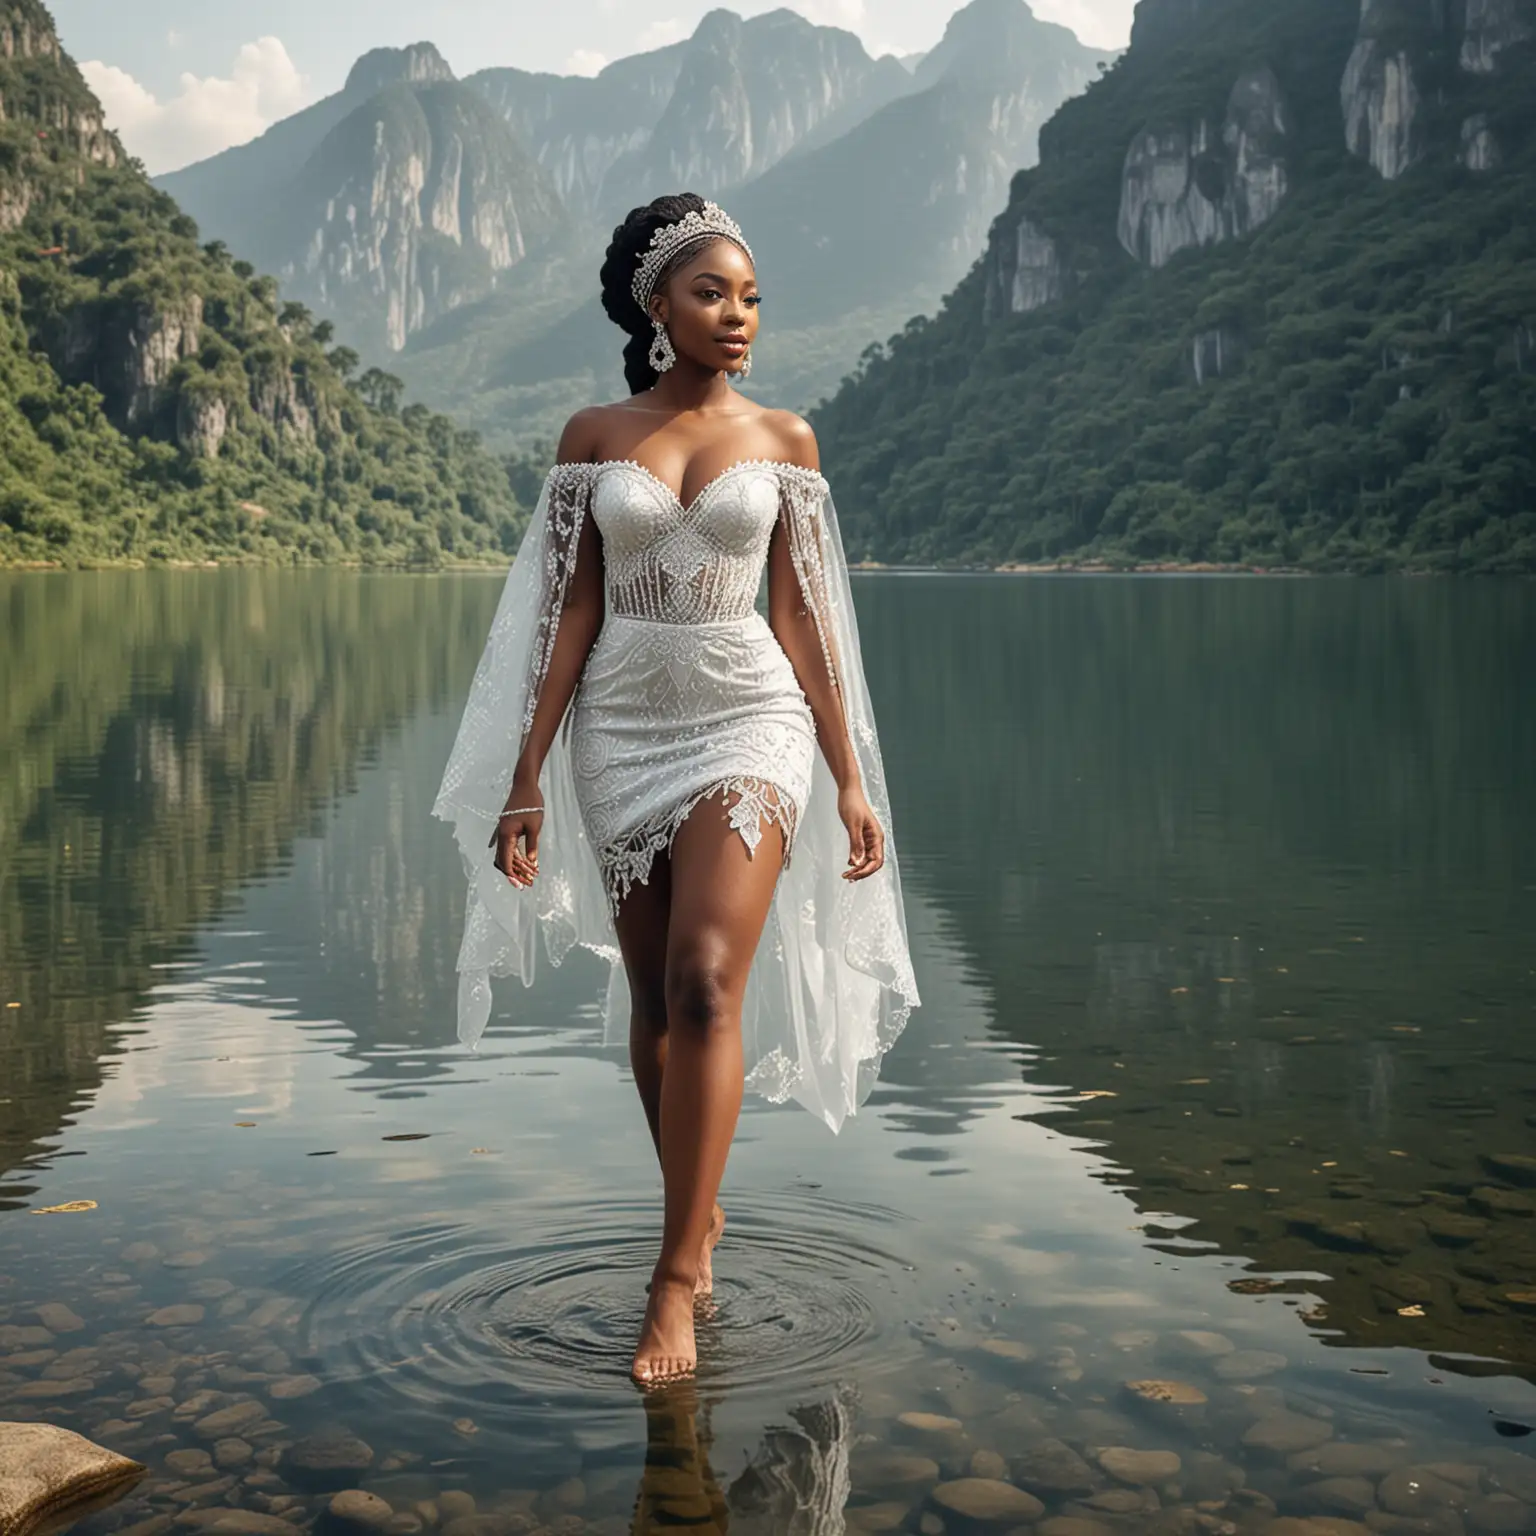 Sublime Nigeria Beauty Pageant Walking on Crystal Lake Amidst Mountains